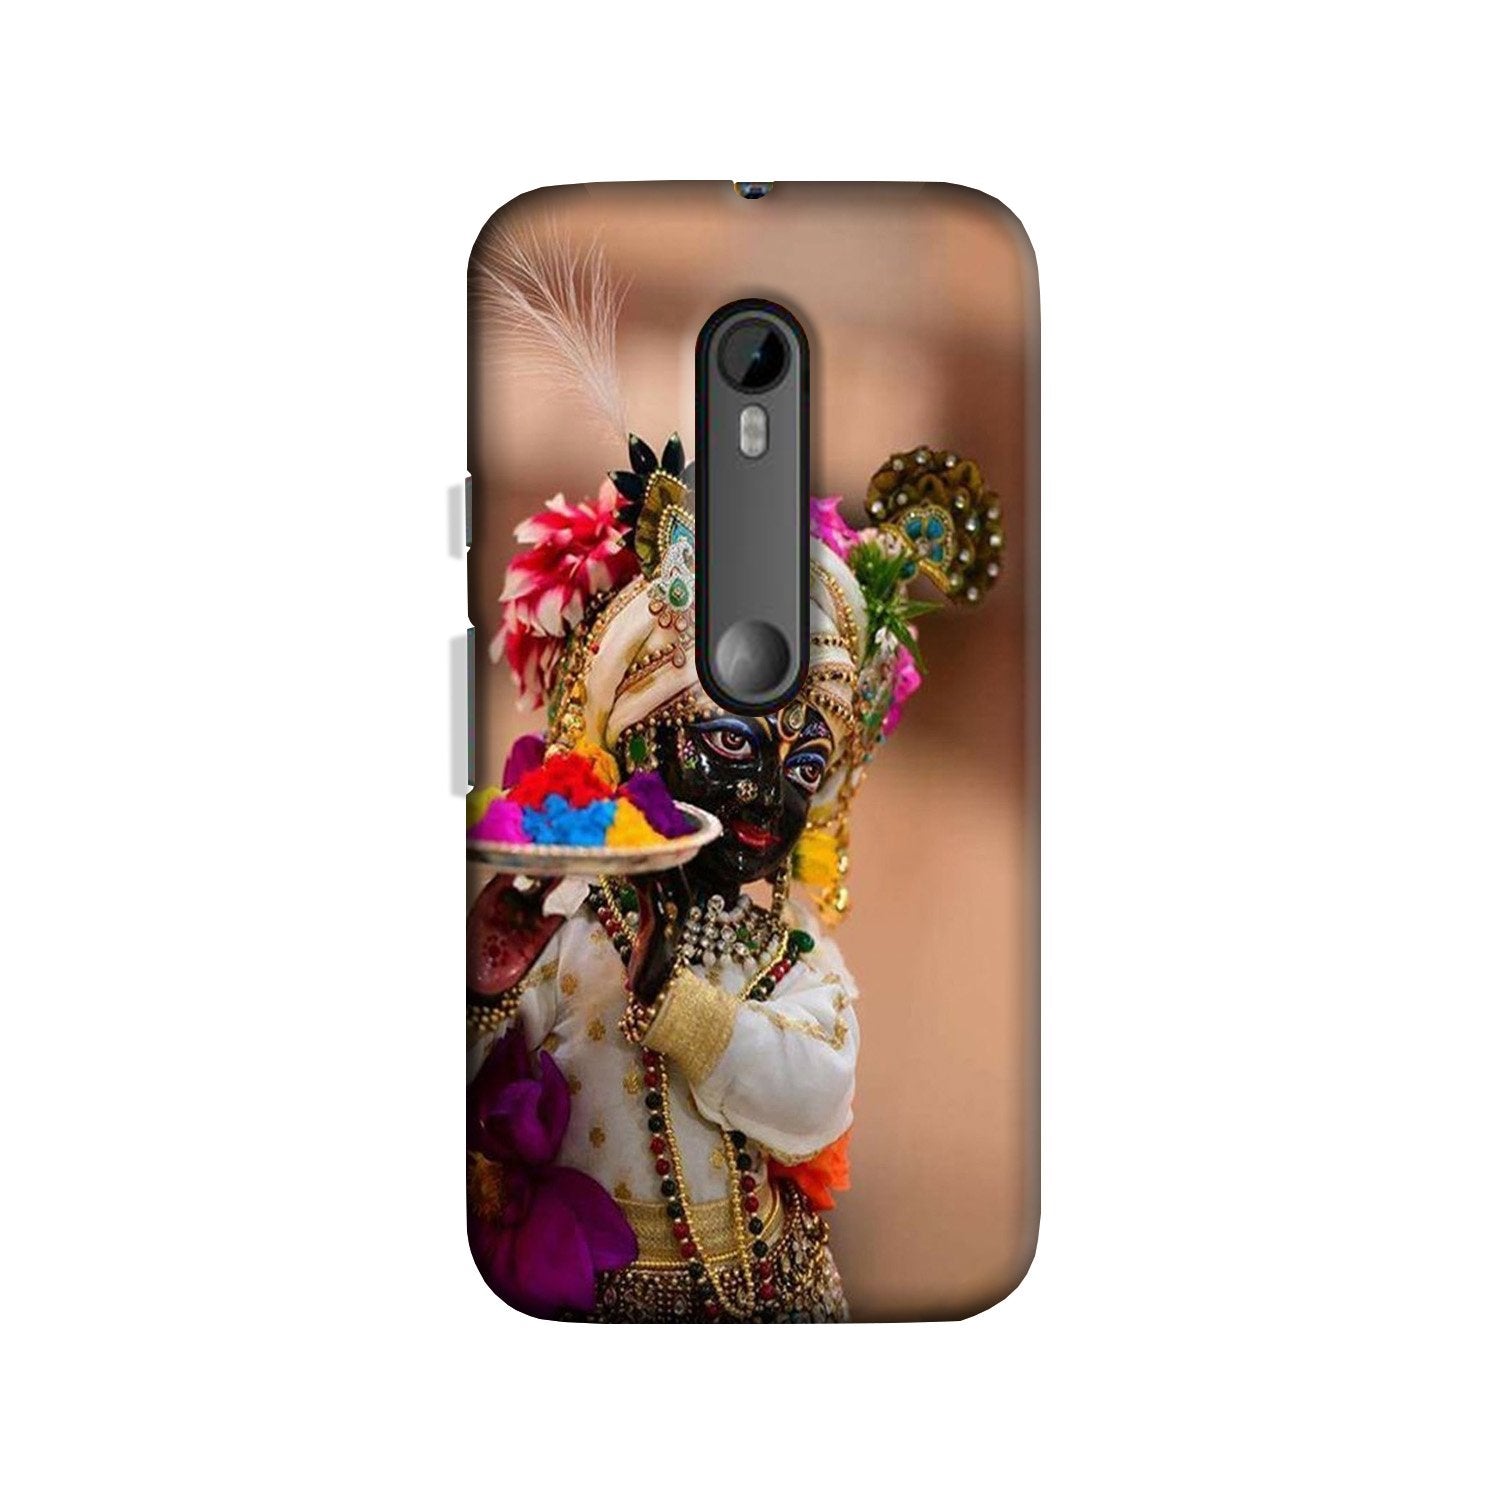 Lord Krishna2 Case for Moto X Force